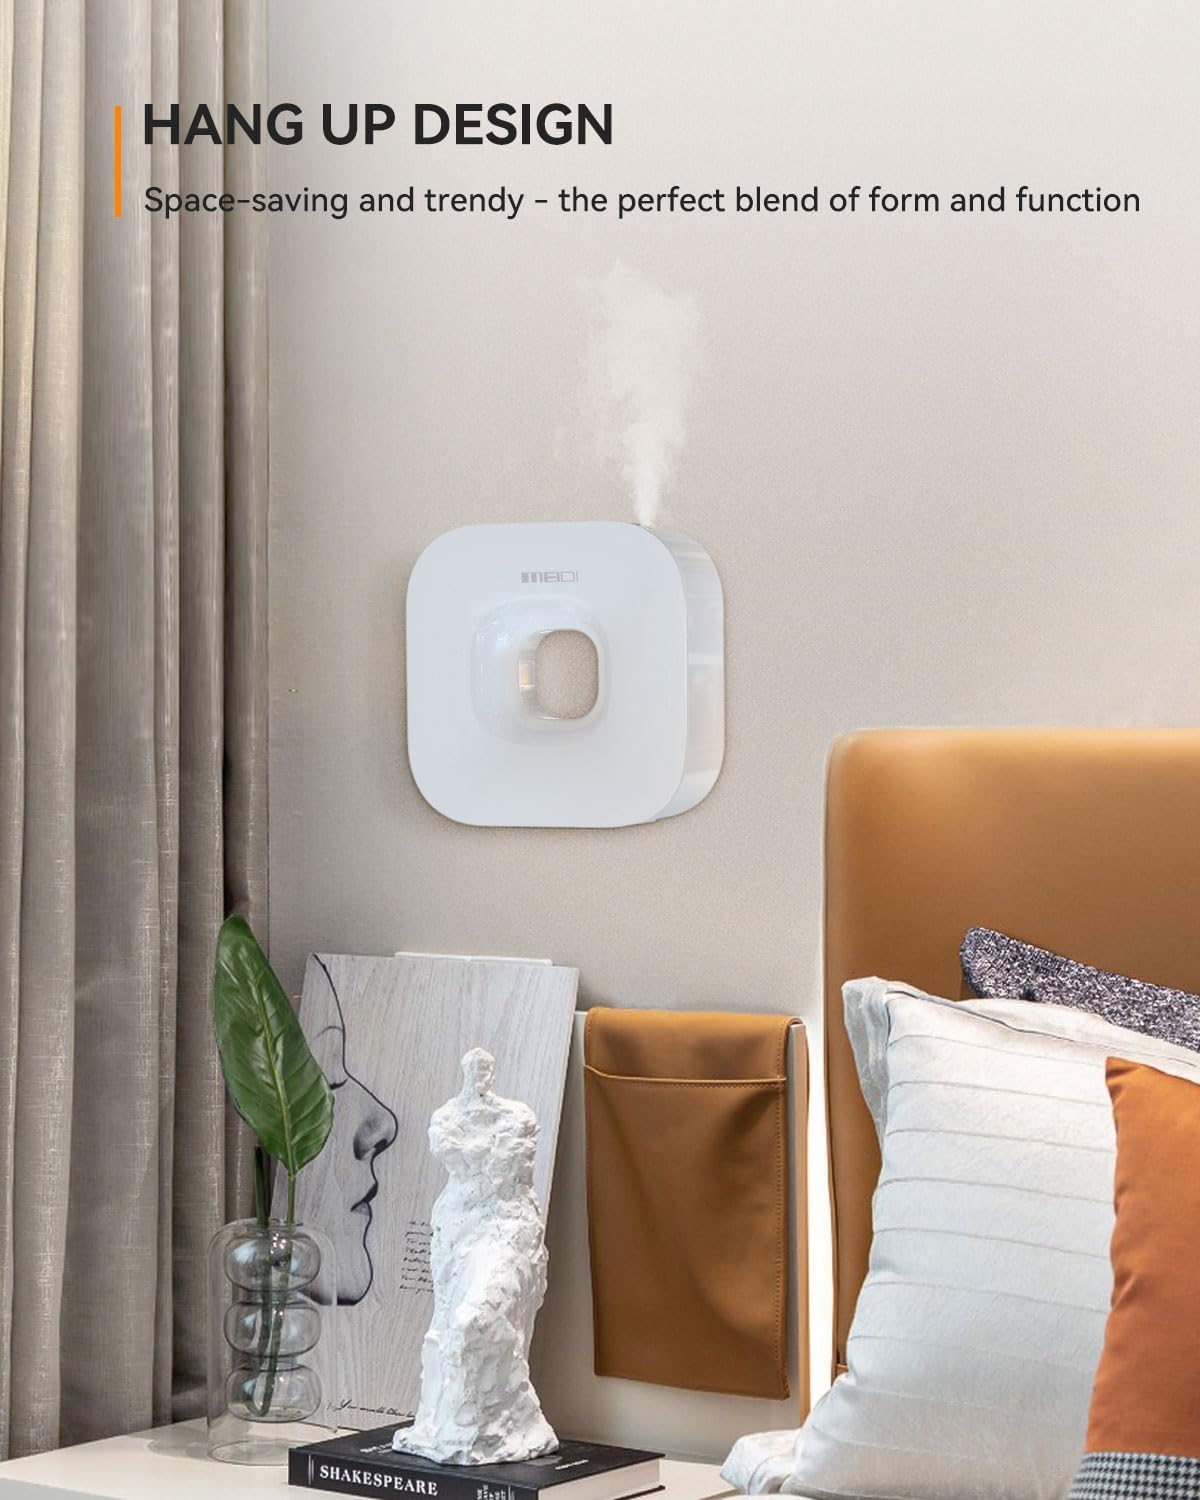 MEIDI Waterless Essential Oil Diffuser - Bluetooth Cordless Aromatherapy Diffuser with App Control, Smart Timer Setting, H